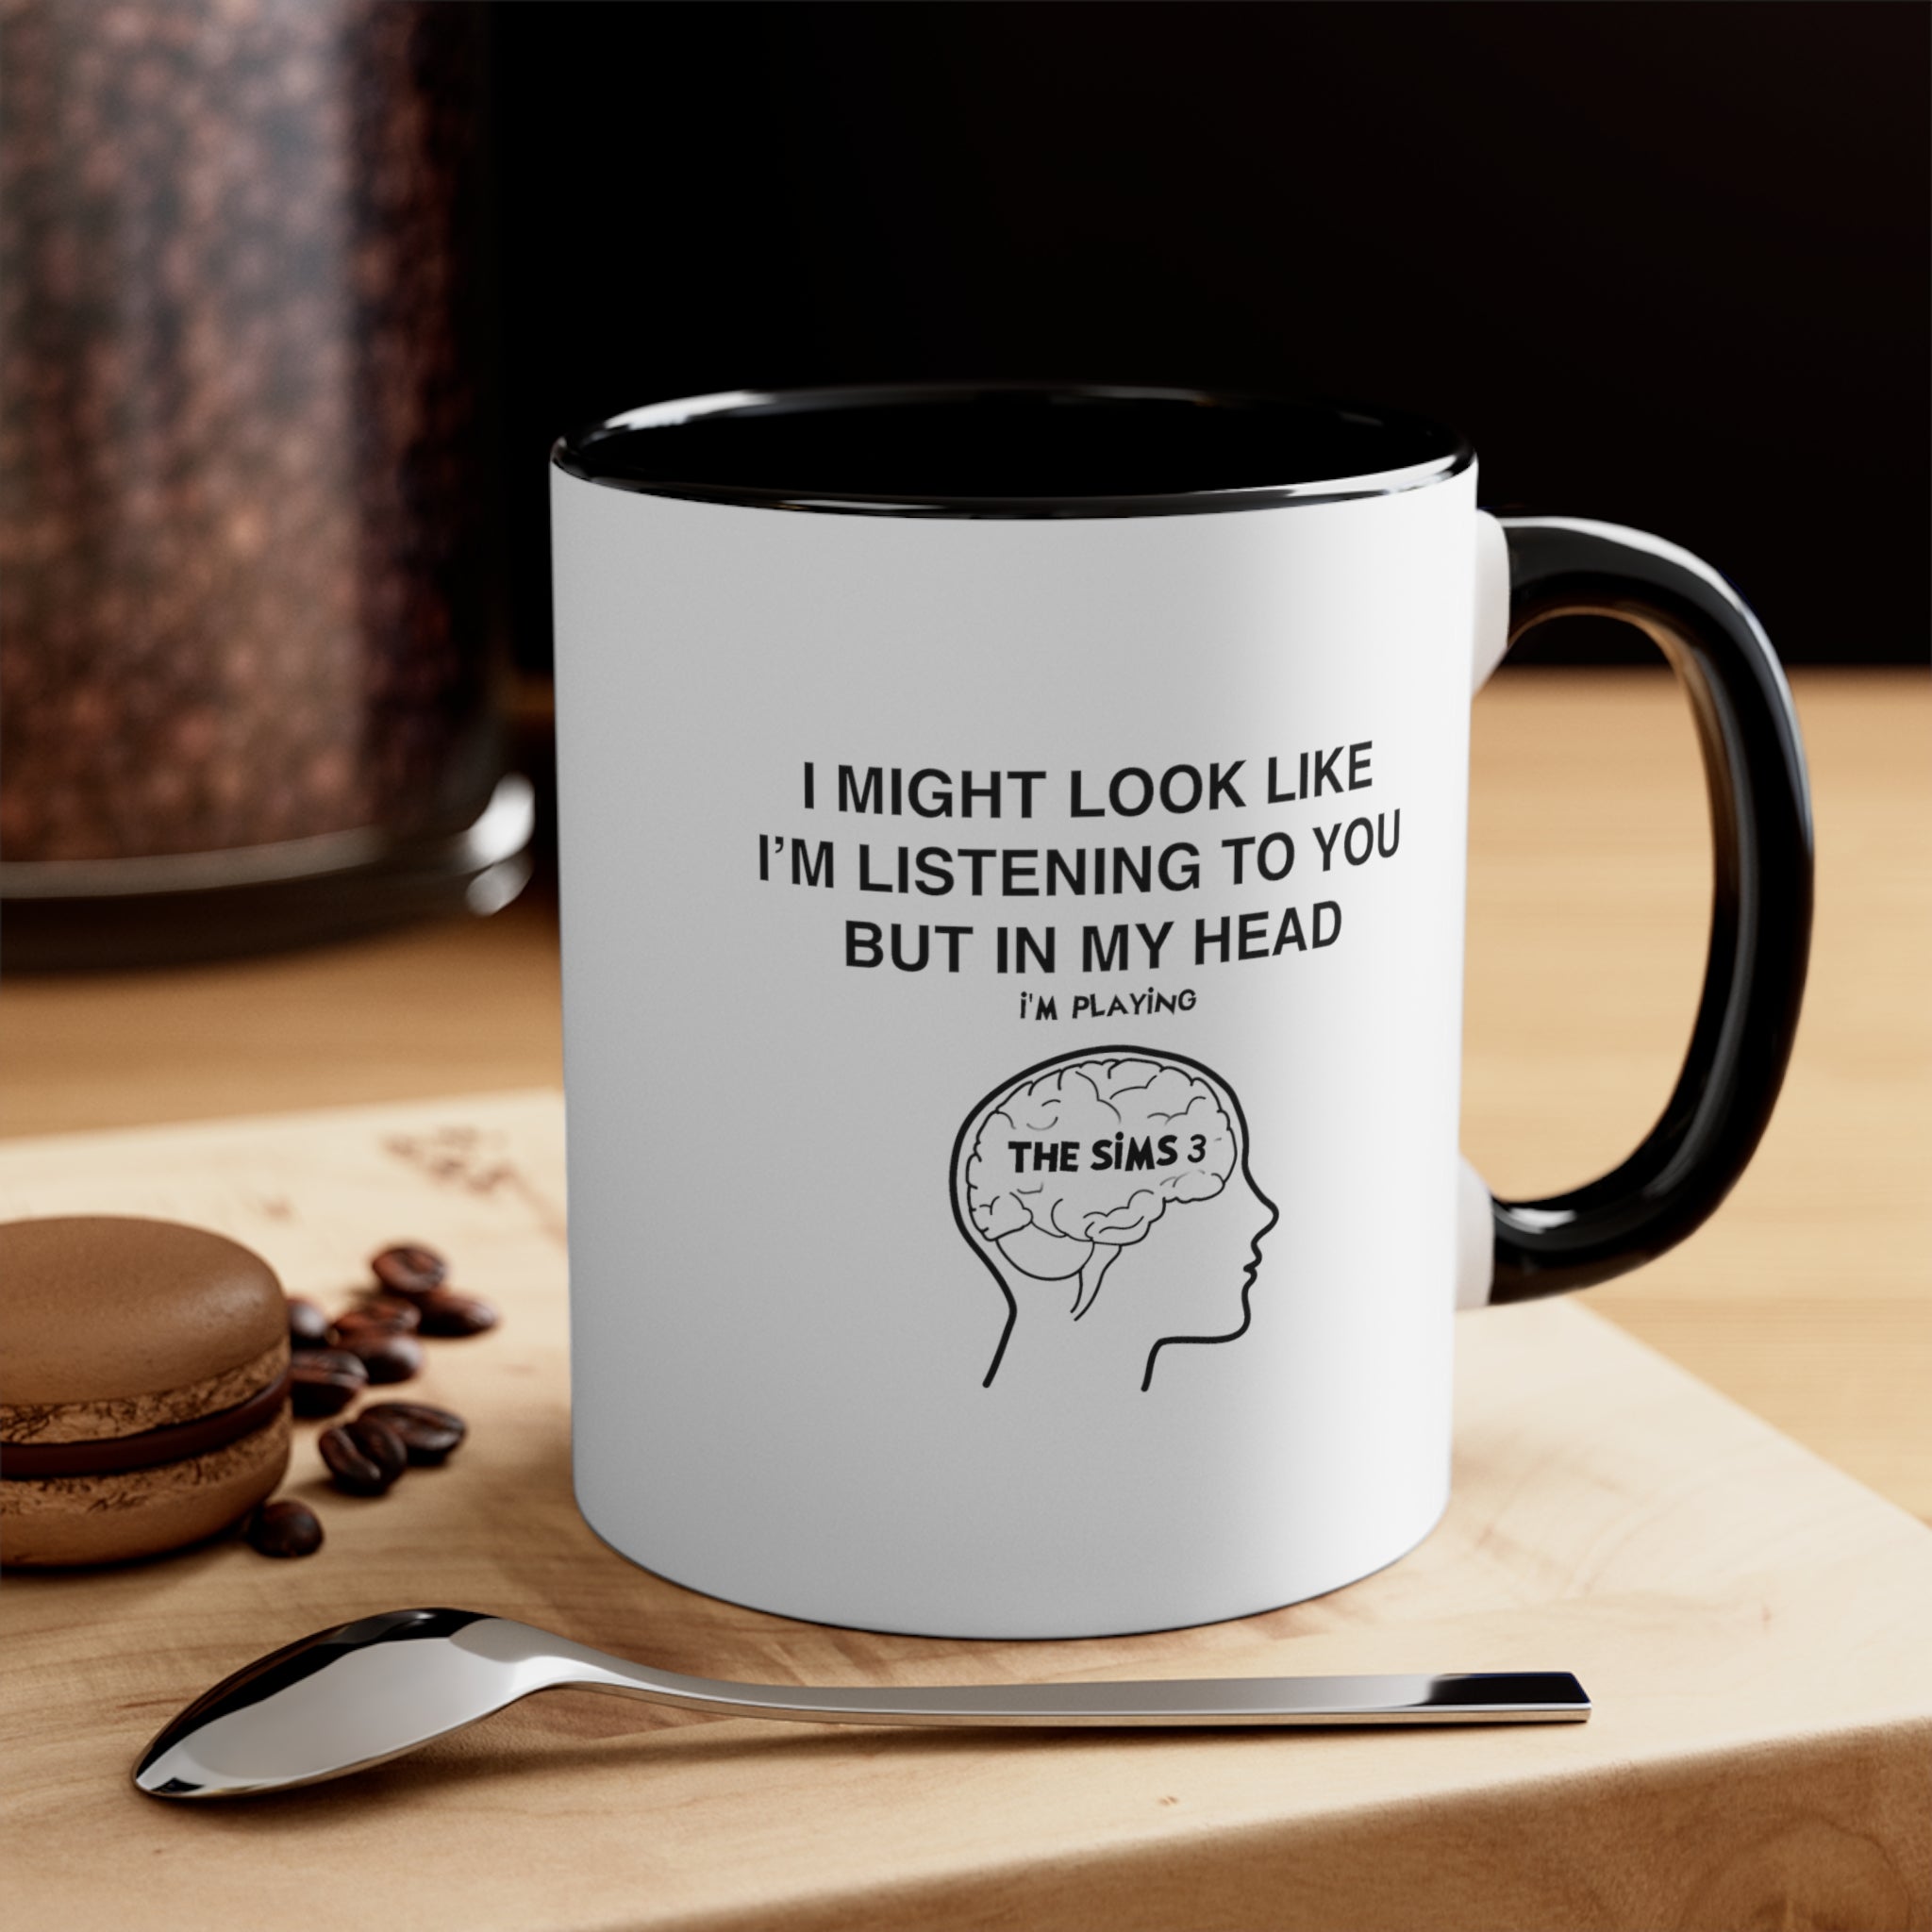 The Sims 3 Funny Coffee Mug, 11oz I Might Look Like I'm Listening Cups Mugs Cup Gamer Gift For Him Her Game Cup Cups Mugs Birthday Christmas Valentine's Anniversary Gifts  [